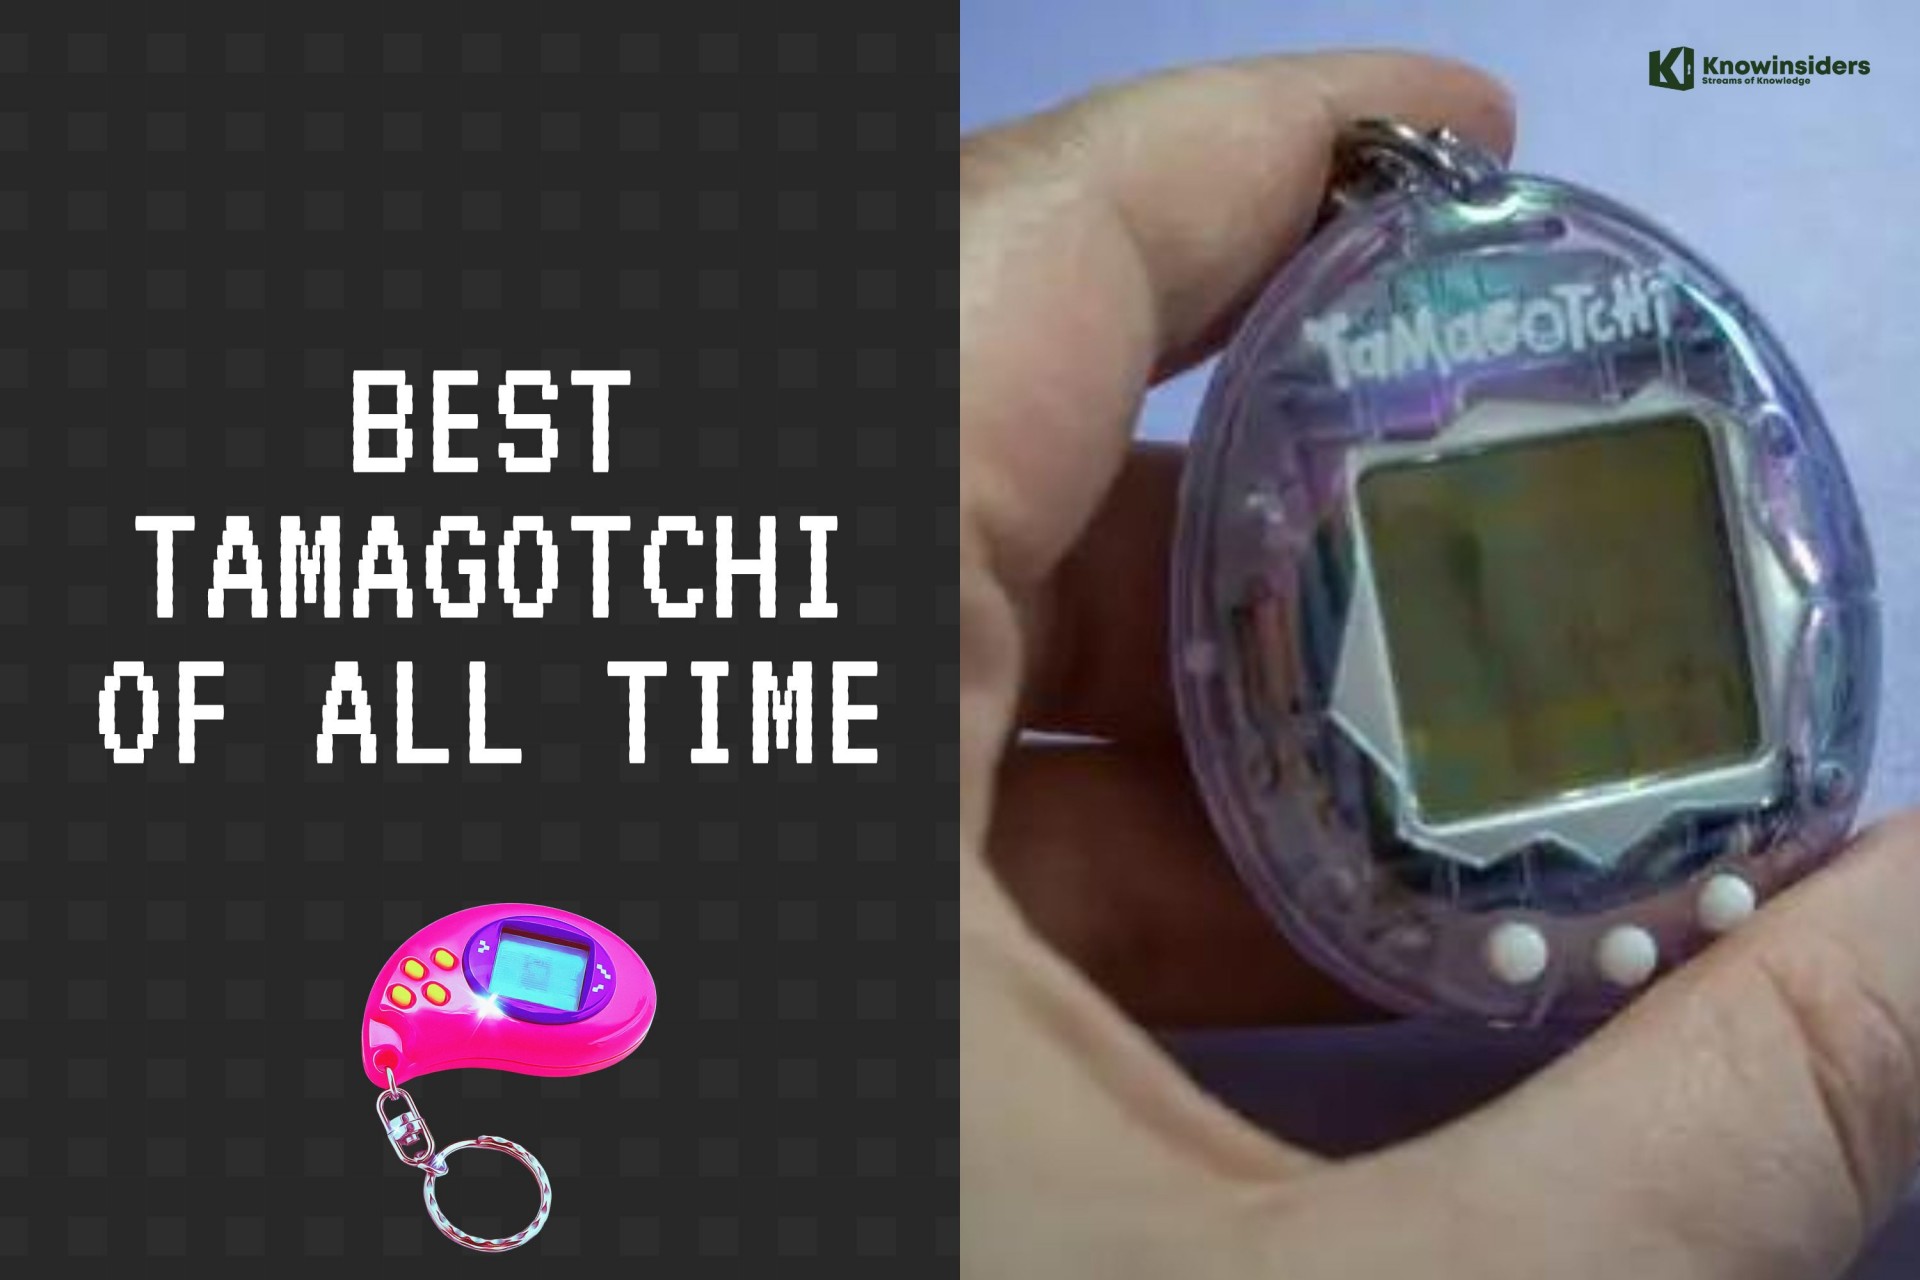 Top 10 Best Tamagotchi Of All Time - Japanese Handheld Game